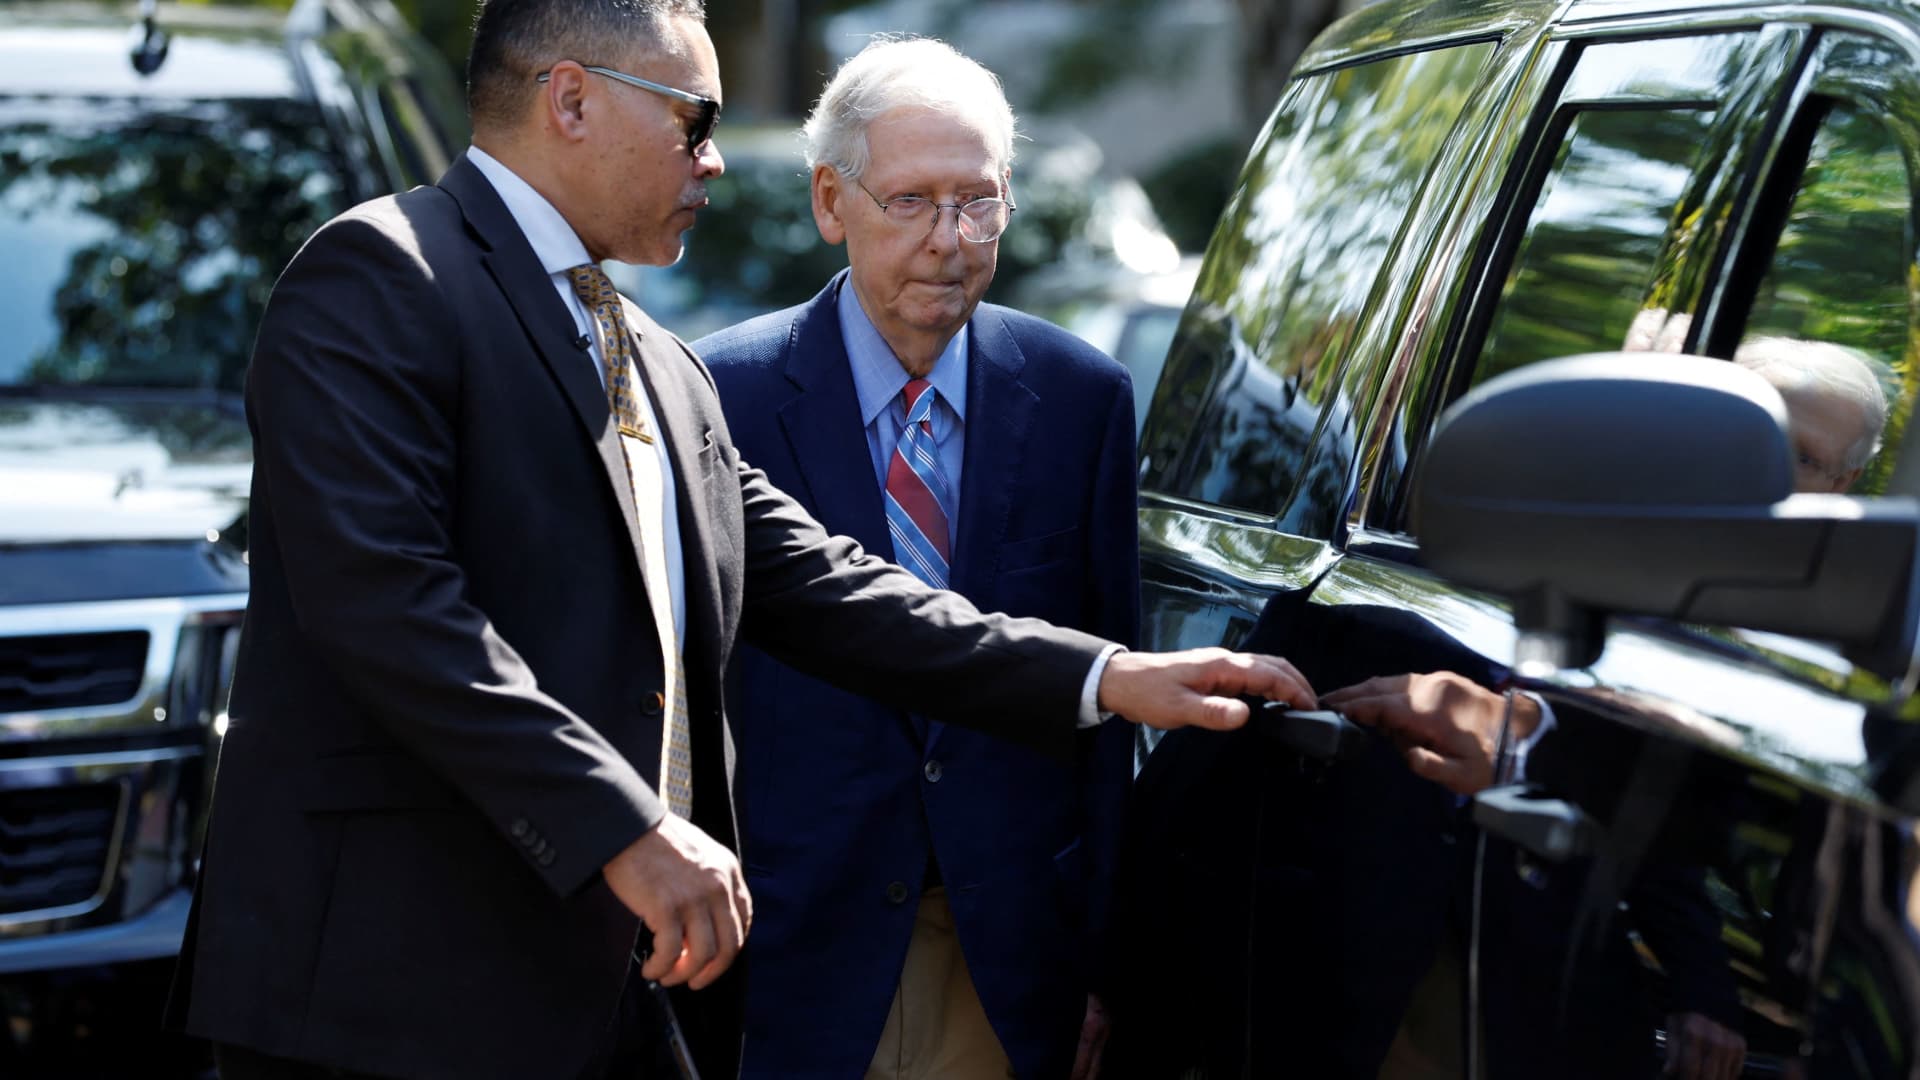 U.S. Senate Minority Leader Mitch McConnell leaves his Washington, D.C., house to return to work at the U.S. Senate, less than a week after he froze for more than 30 seconds while speaking to reporters at an event in his home state of Kentucky, in Washington, D.C., Sept. 5, 2023.